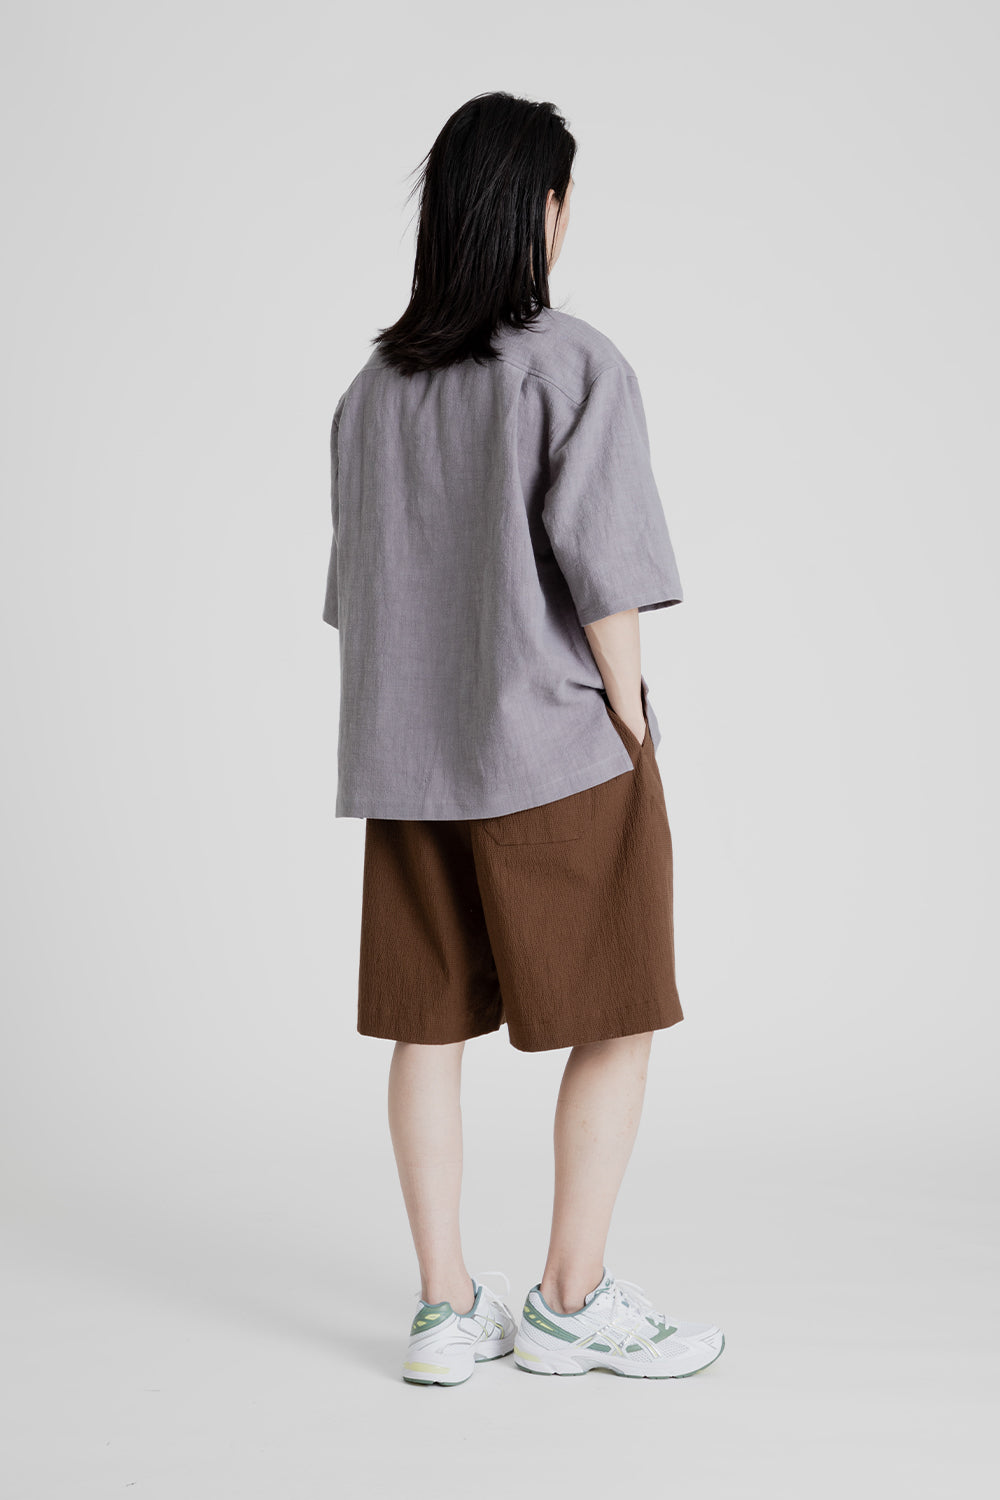 S.K Manor Hill Barrack Shorts in Brown Puckered